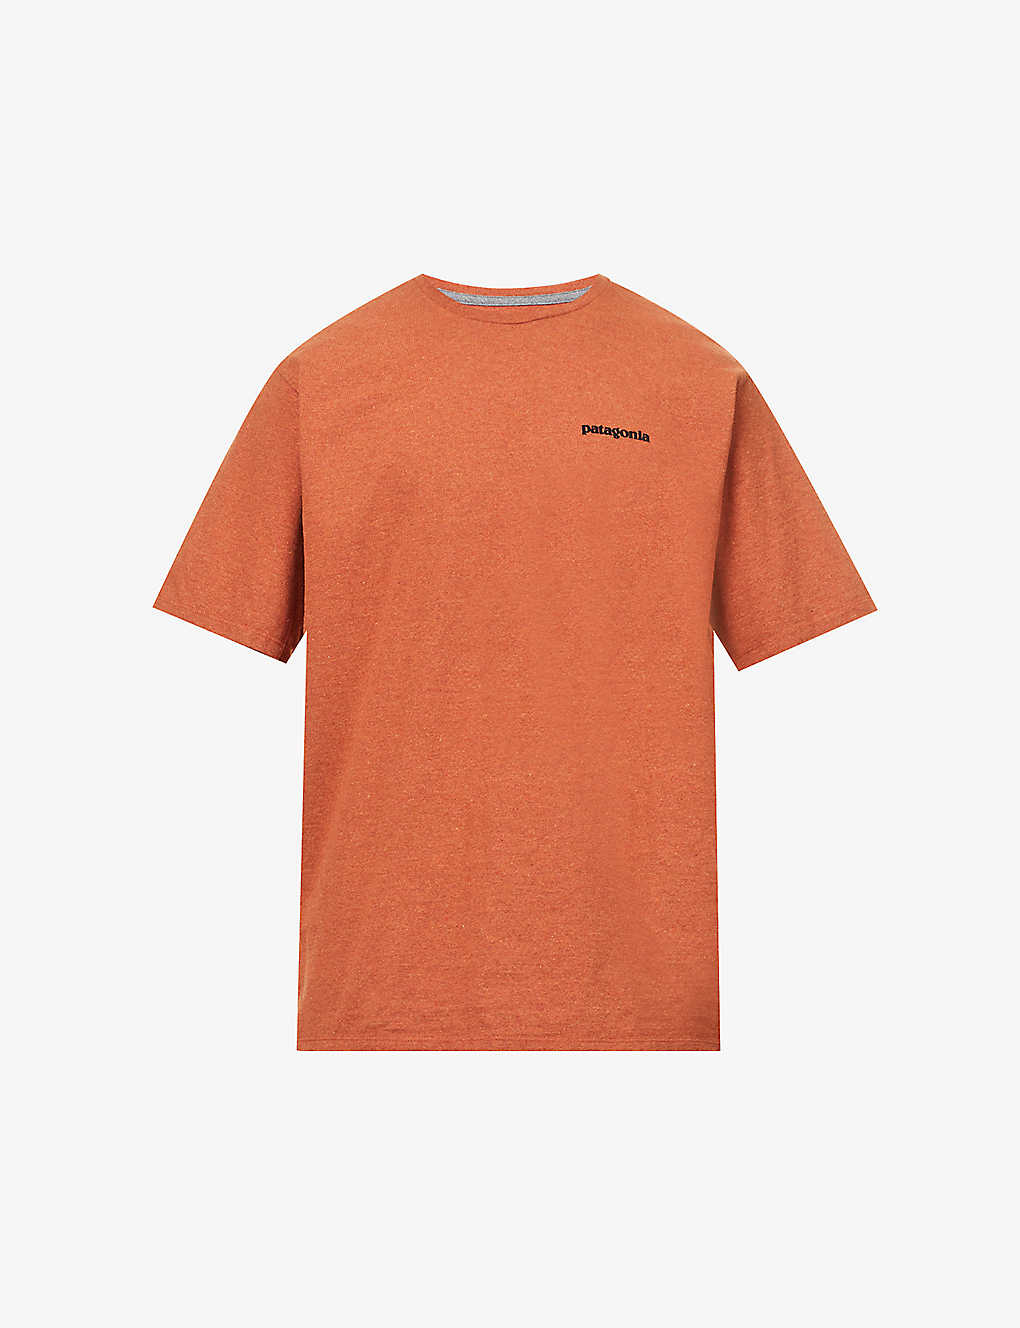 PATAGONIA P-6 LOGO RESPONSIBILI-TEE RECYCLED COTTON AND RECYCLED POLYESTER-BLEND T-SHIRT,66187111